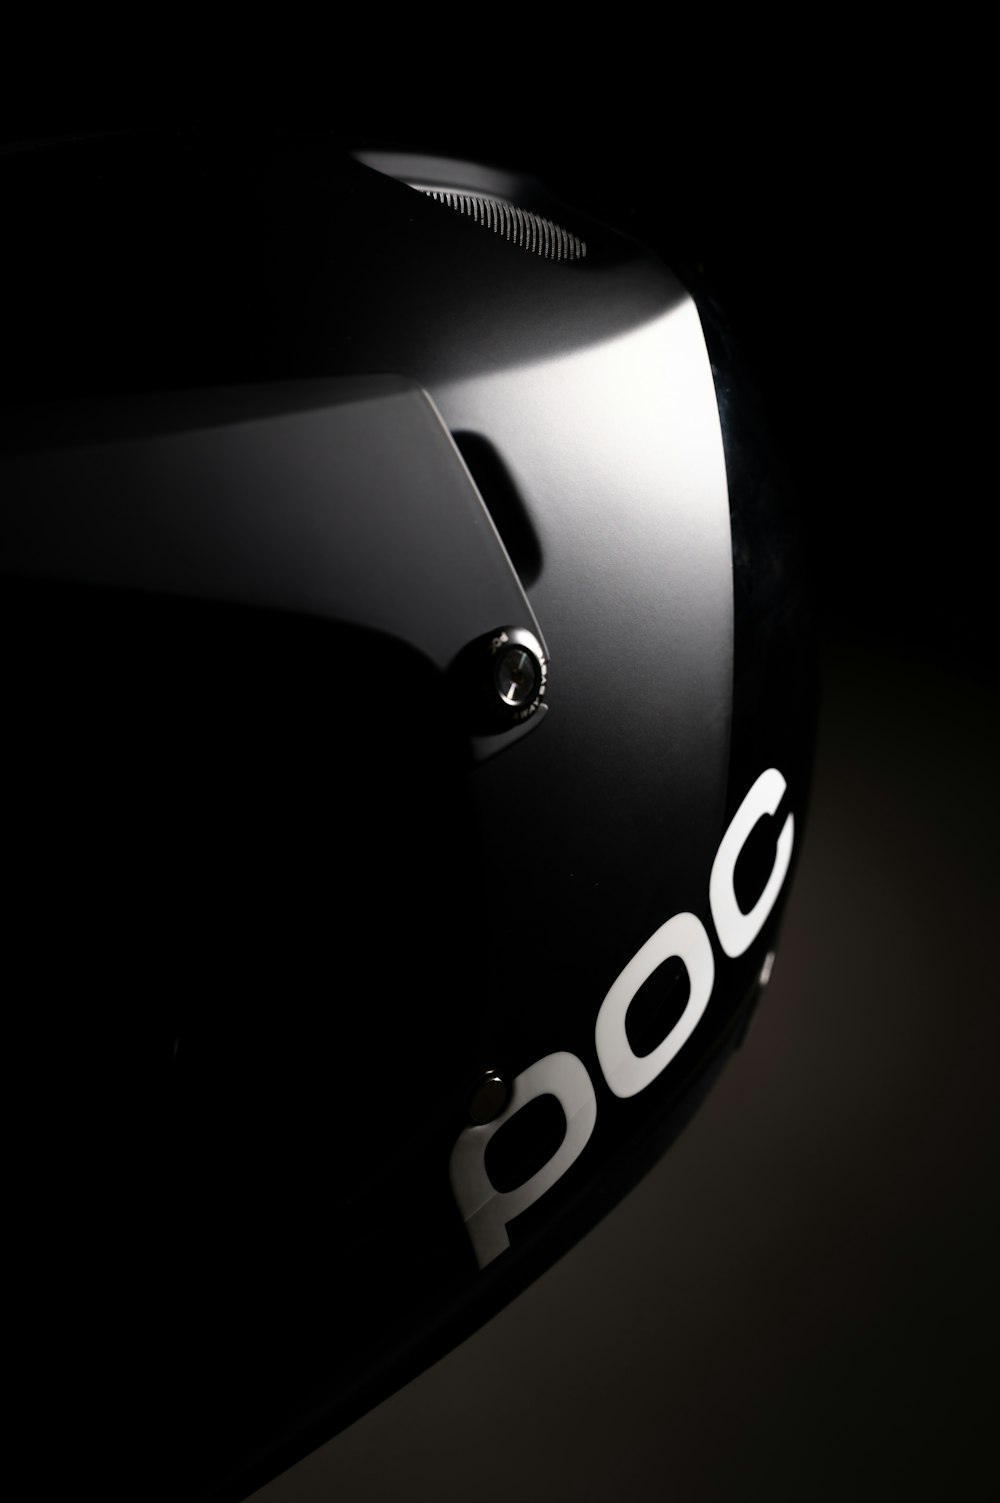 a close up of a helmet on a black background